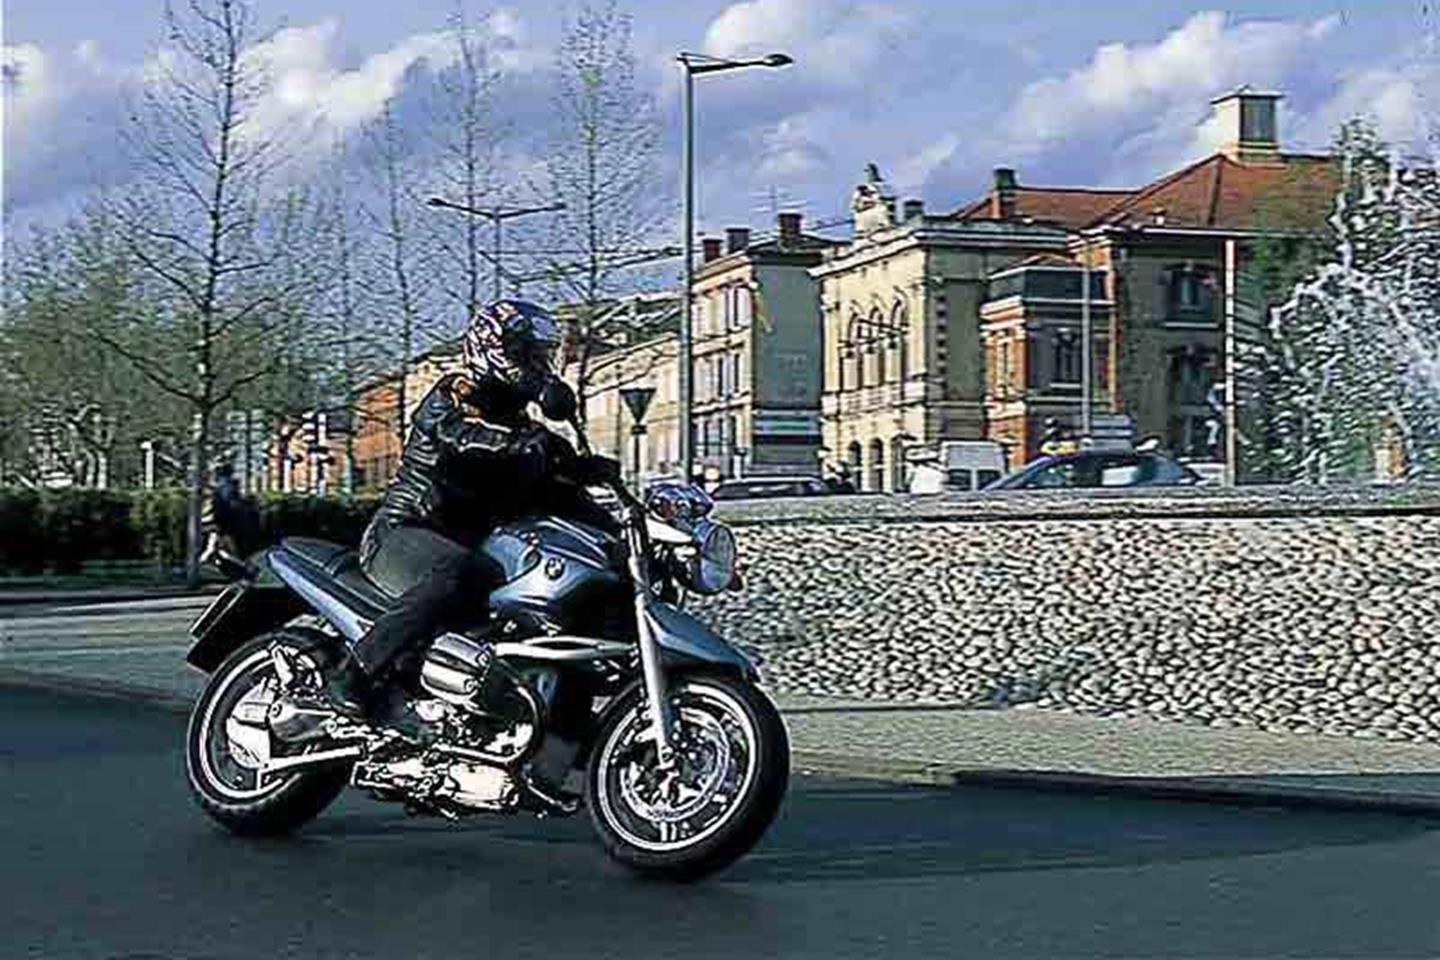 BMW R1150R (2001-2006) Review | Speed, Specs & Prices